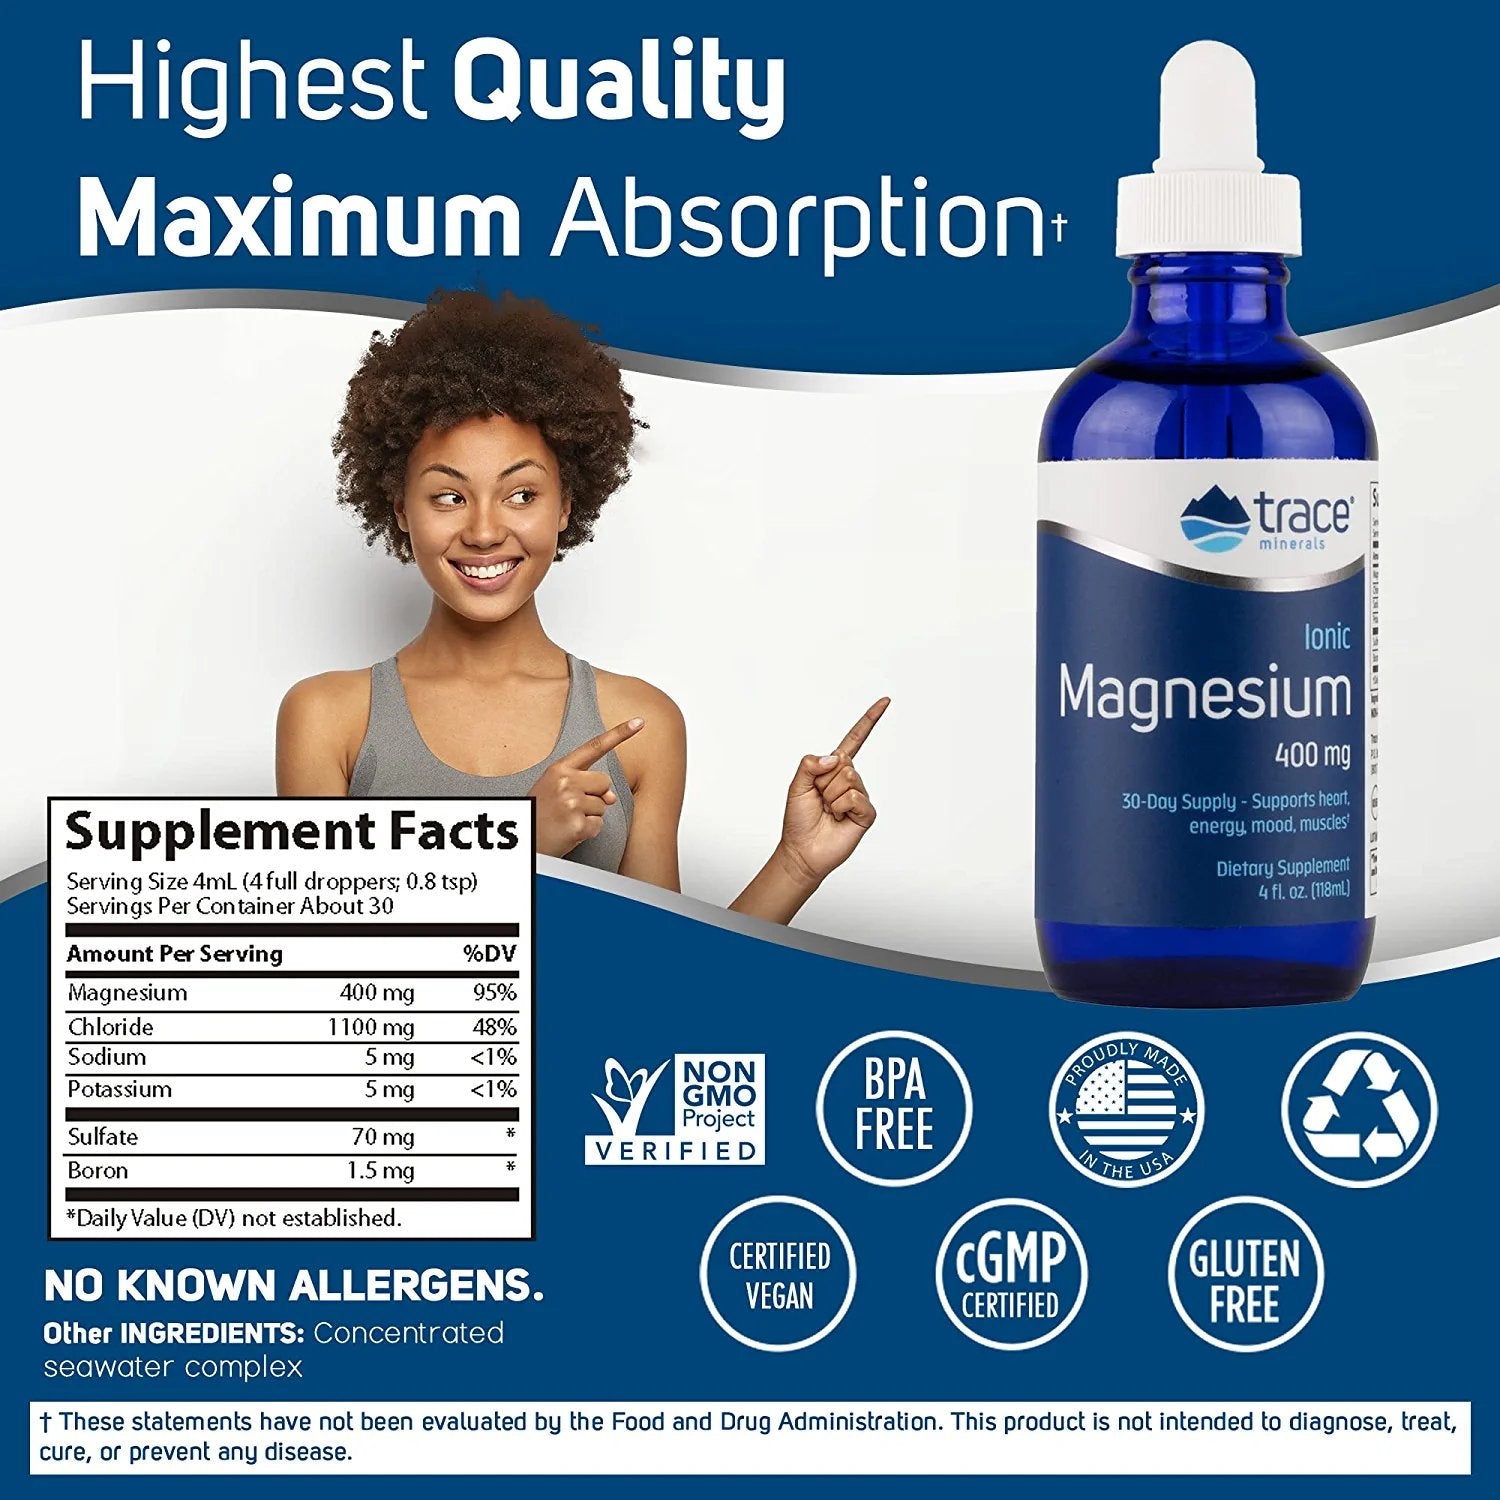 Trace Minerals | Liquid Ionic Magnesium 400 mg | Supports Normal Blood Pressure, Heart Health, Calm Mood, Sleep, Energy, Relief from Muscle Cramps, Spasms | 4 fl oz - Pack of 2 (64 Servings)